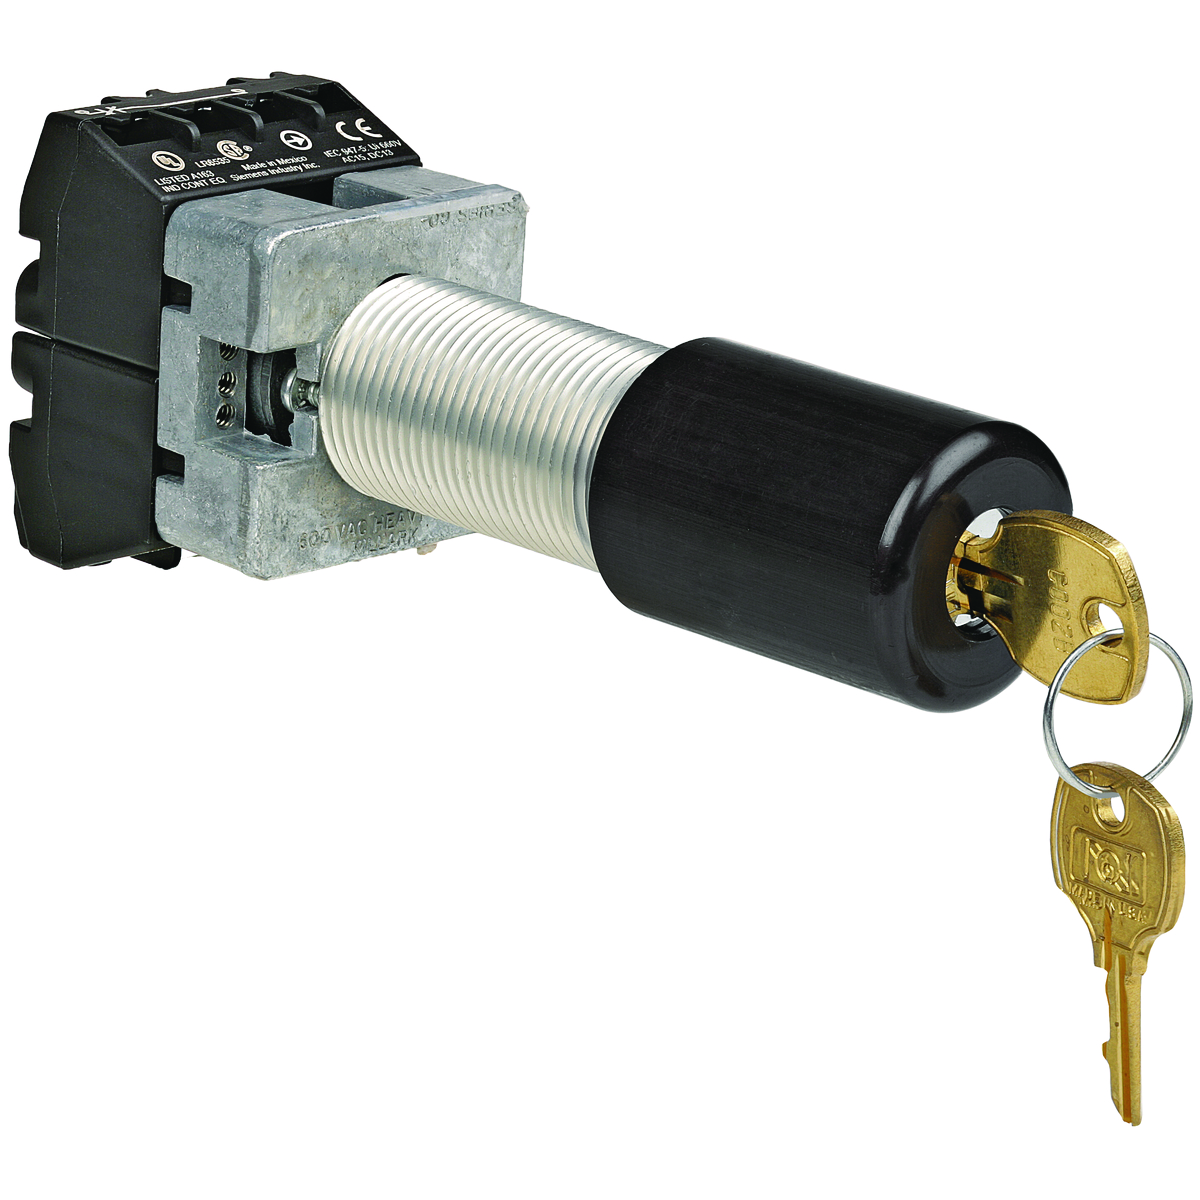 G SERIES - ALUMINUM SHORT MAINTAINED CONTACT 2-POSITION KEYED SELECTORSWITCH OPERATOR - KEYED DIFFERENT WITH KEY REMOVAL IN LEFT POSITION -